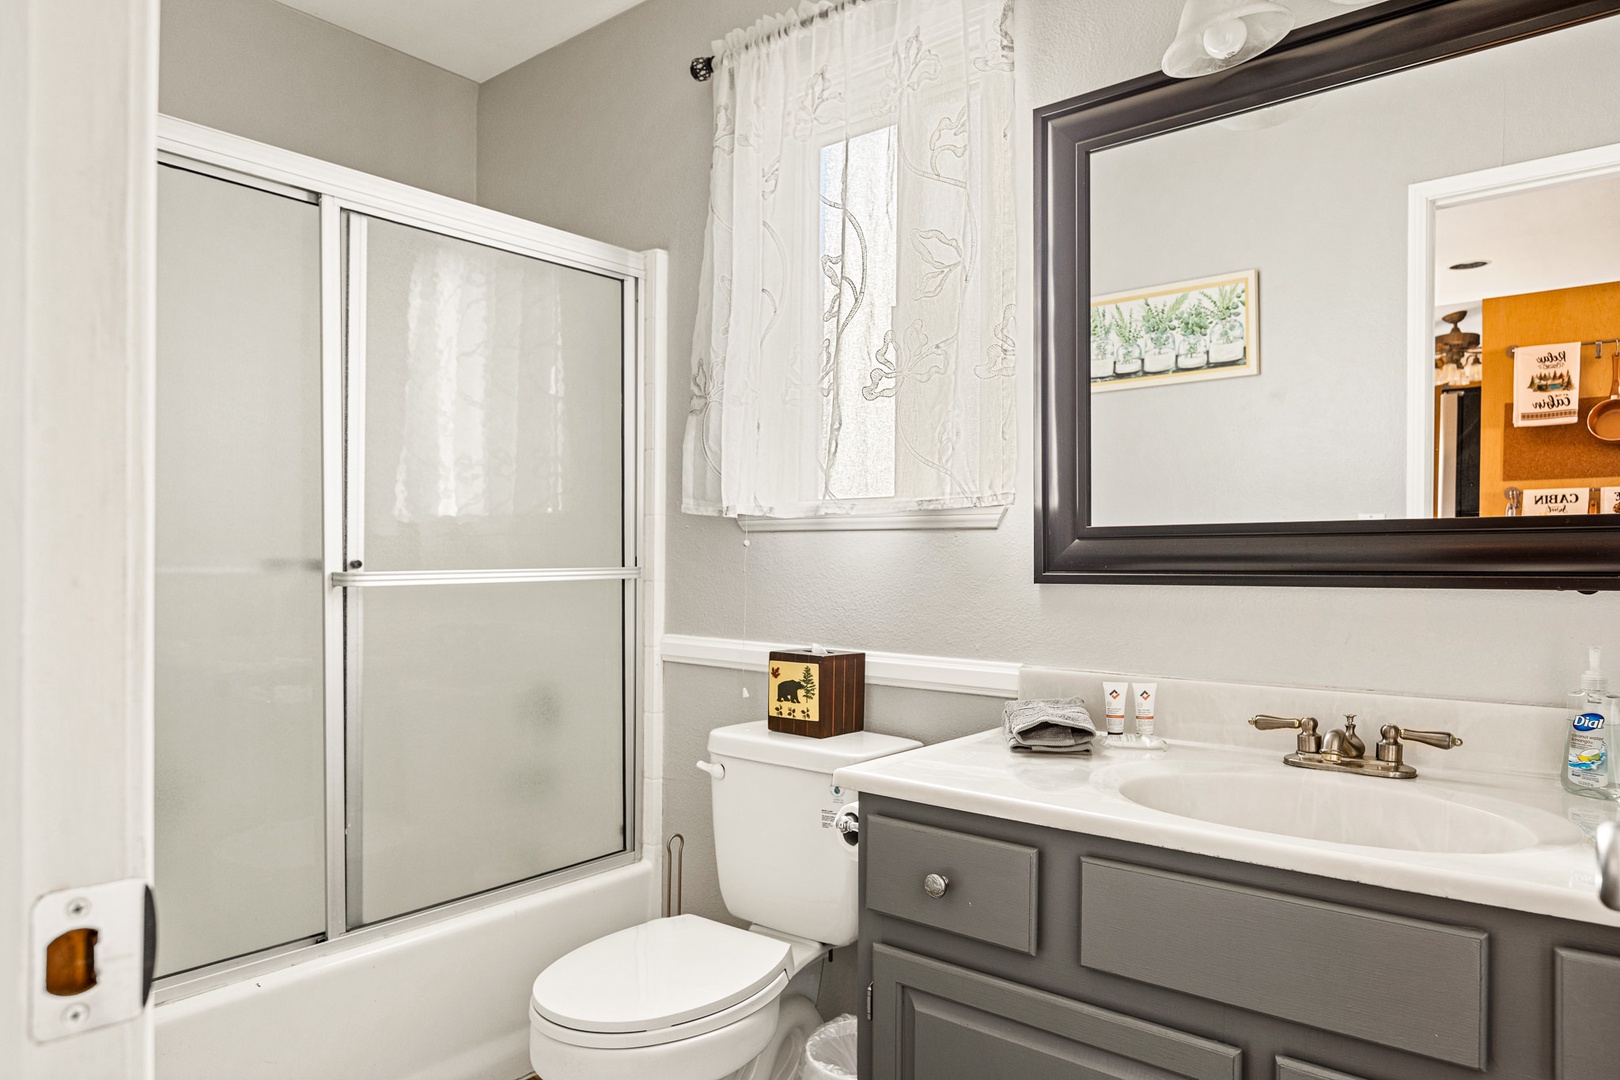 A full bath near the game room offers a single vanity & shower/tub combo